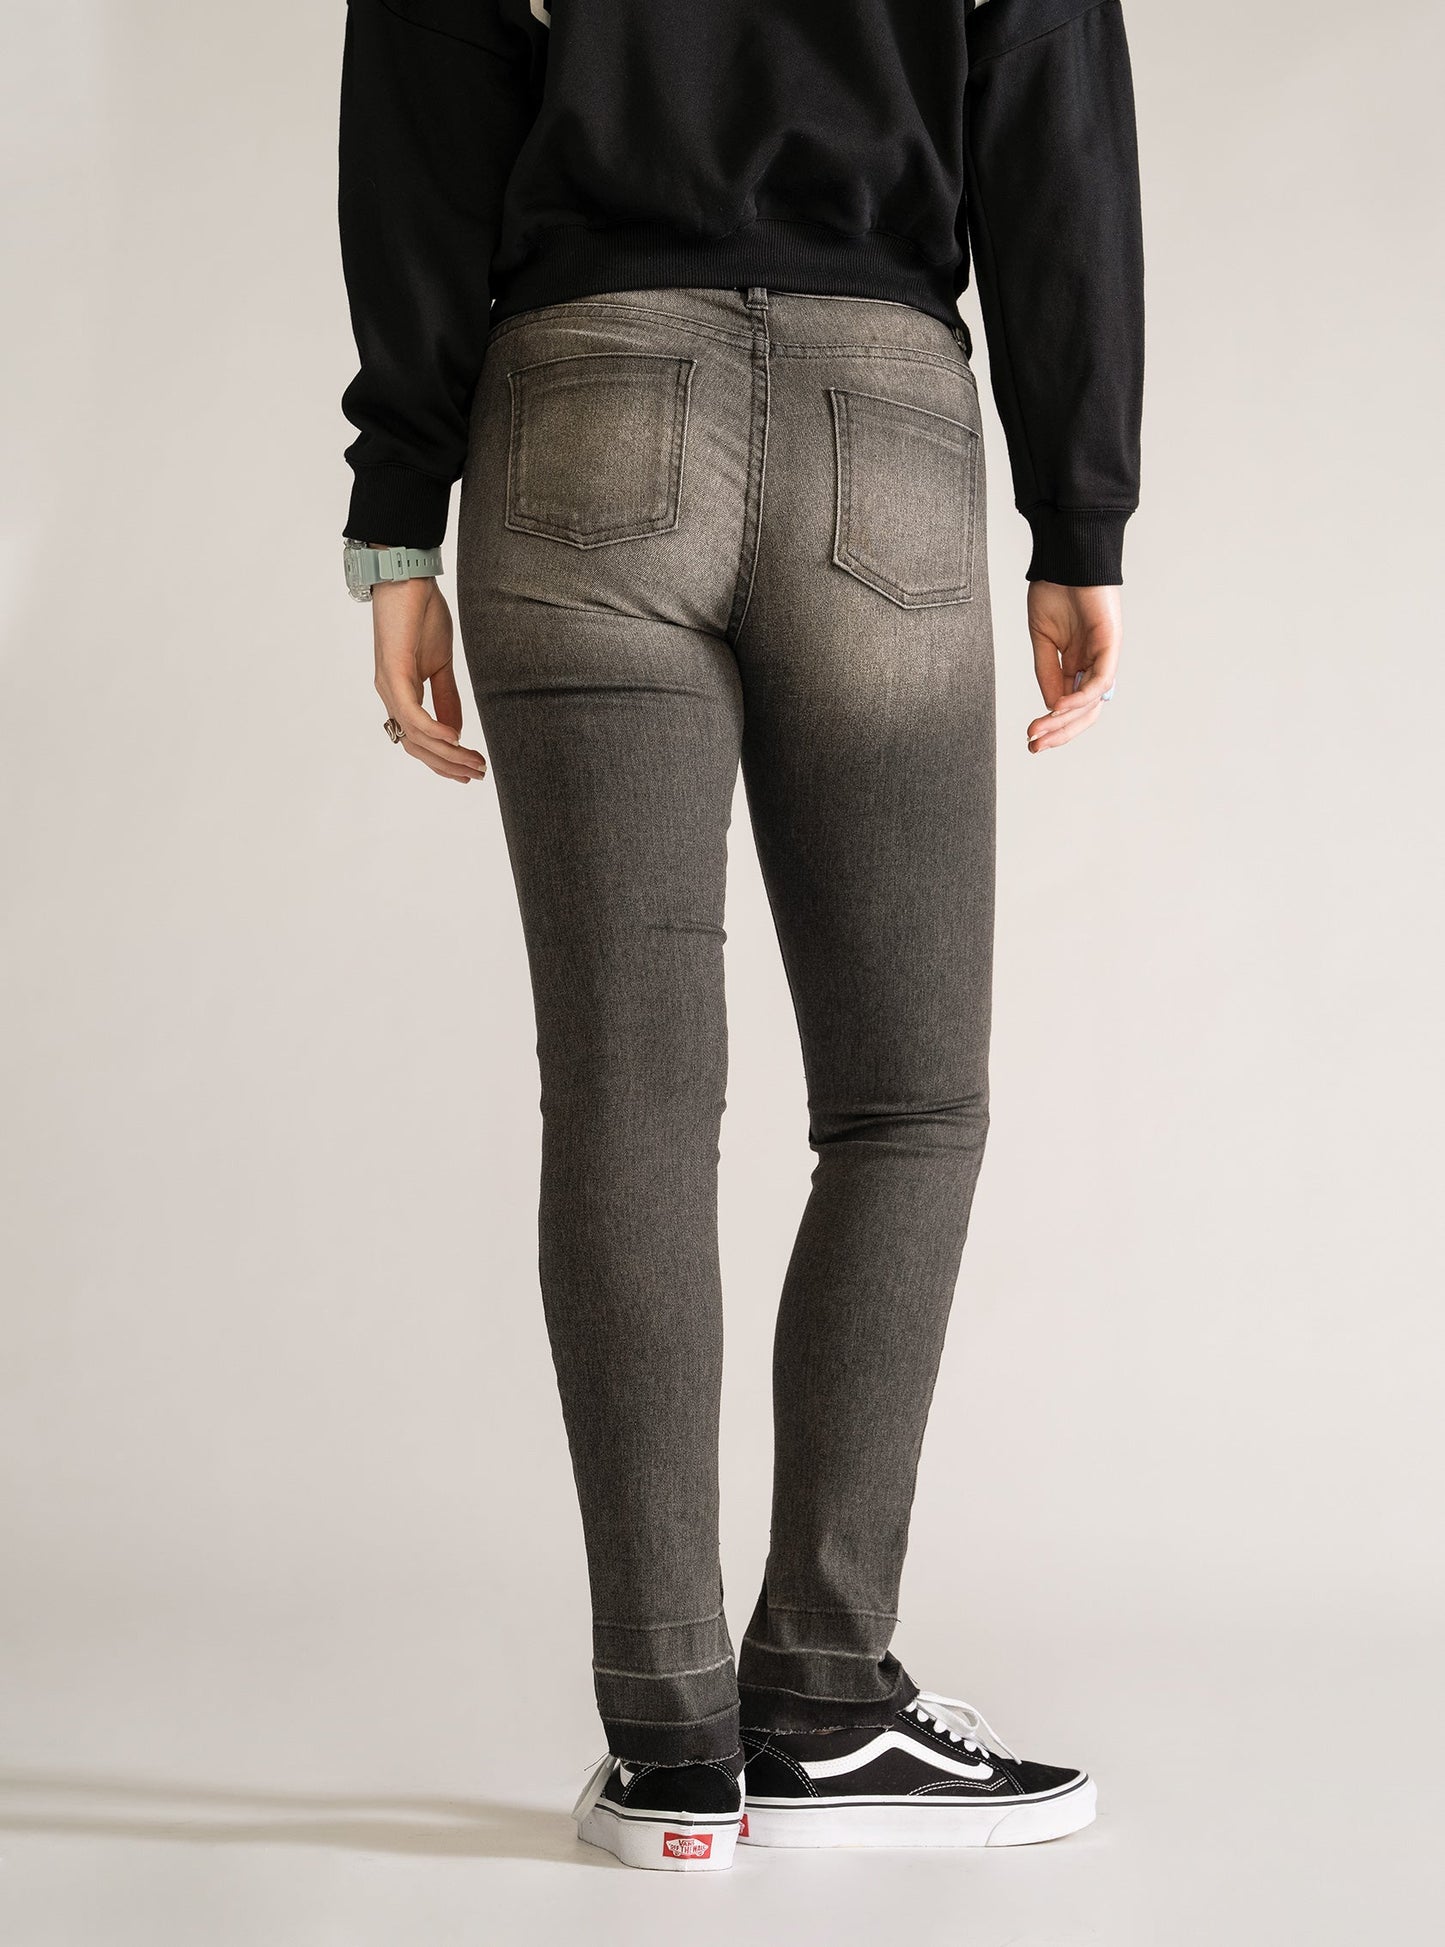 Washed Black Skinny Jeans, Gris Obscuro